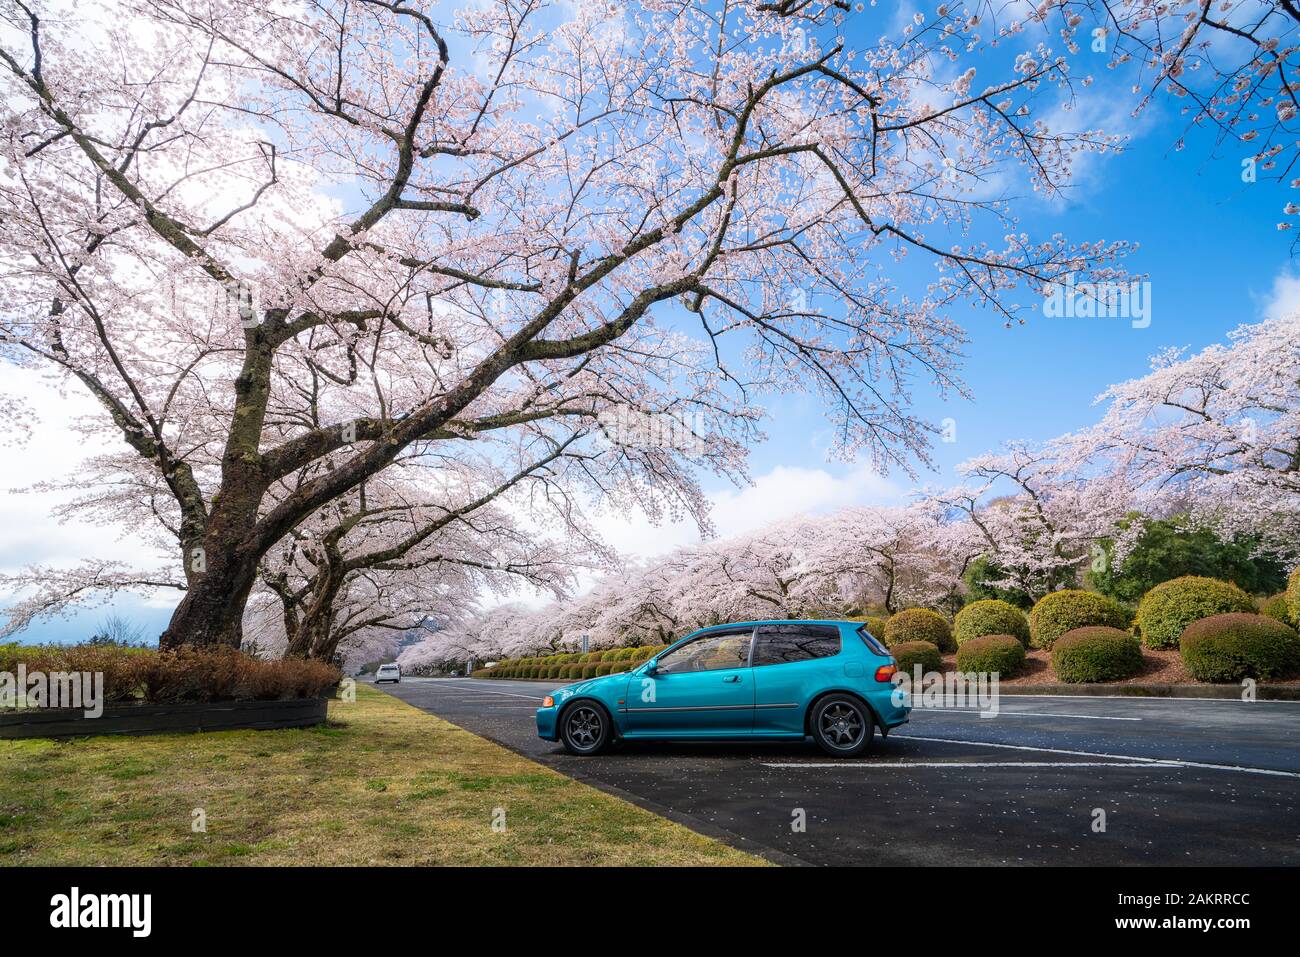 Beautiful view of Cherry blossom tunnel during spring season in April along both sides of the prefectural highway in Shizuoka prefecture, Japan. Stock Photo